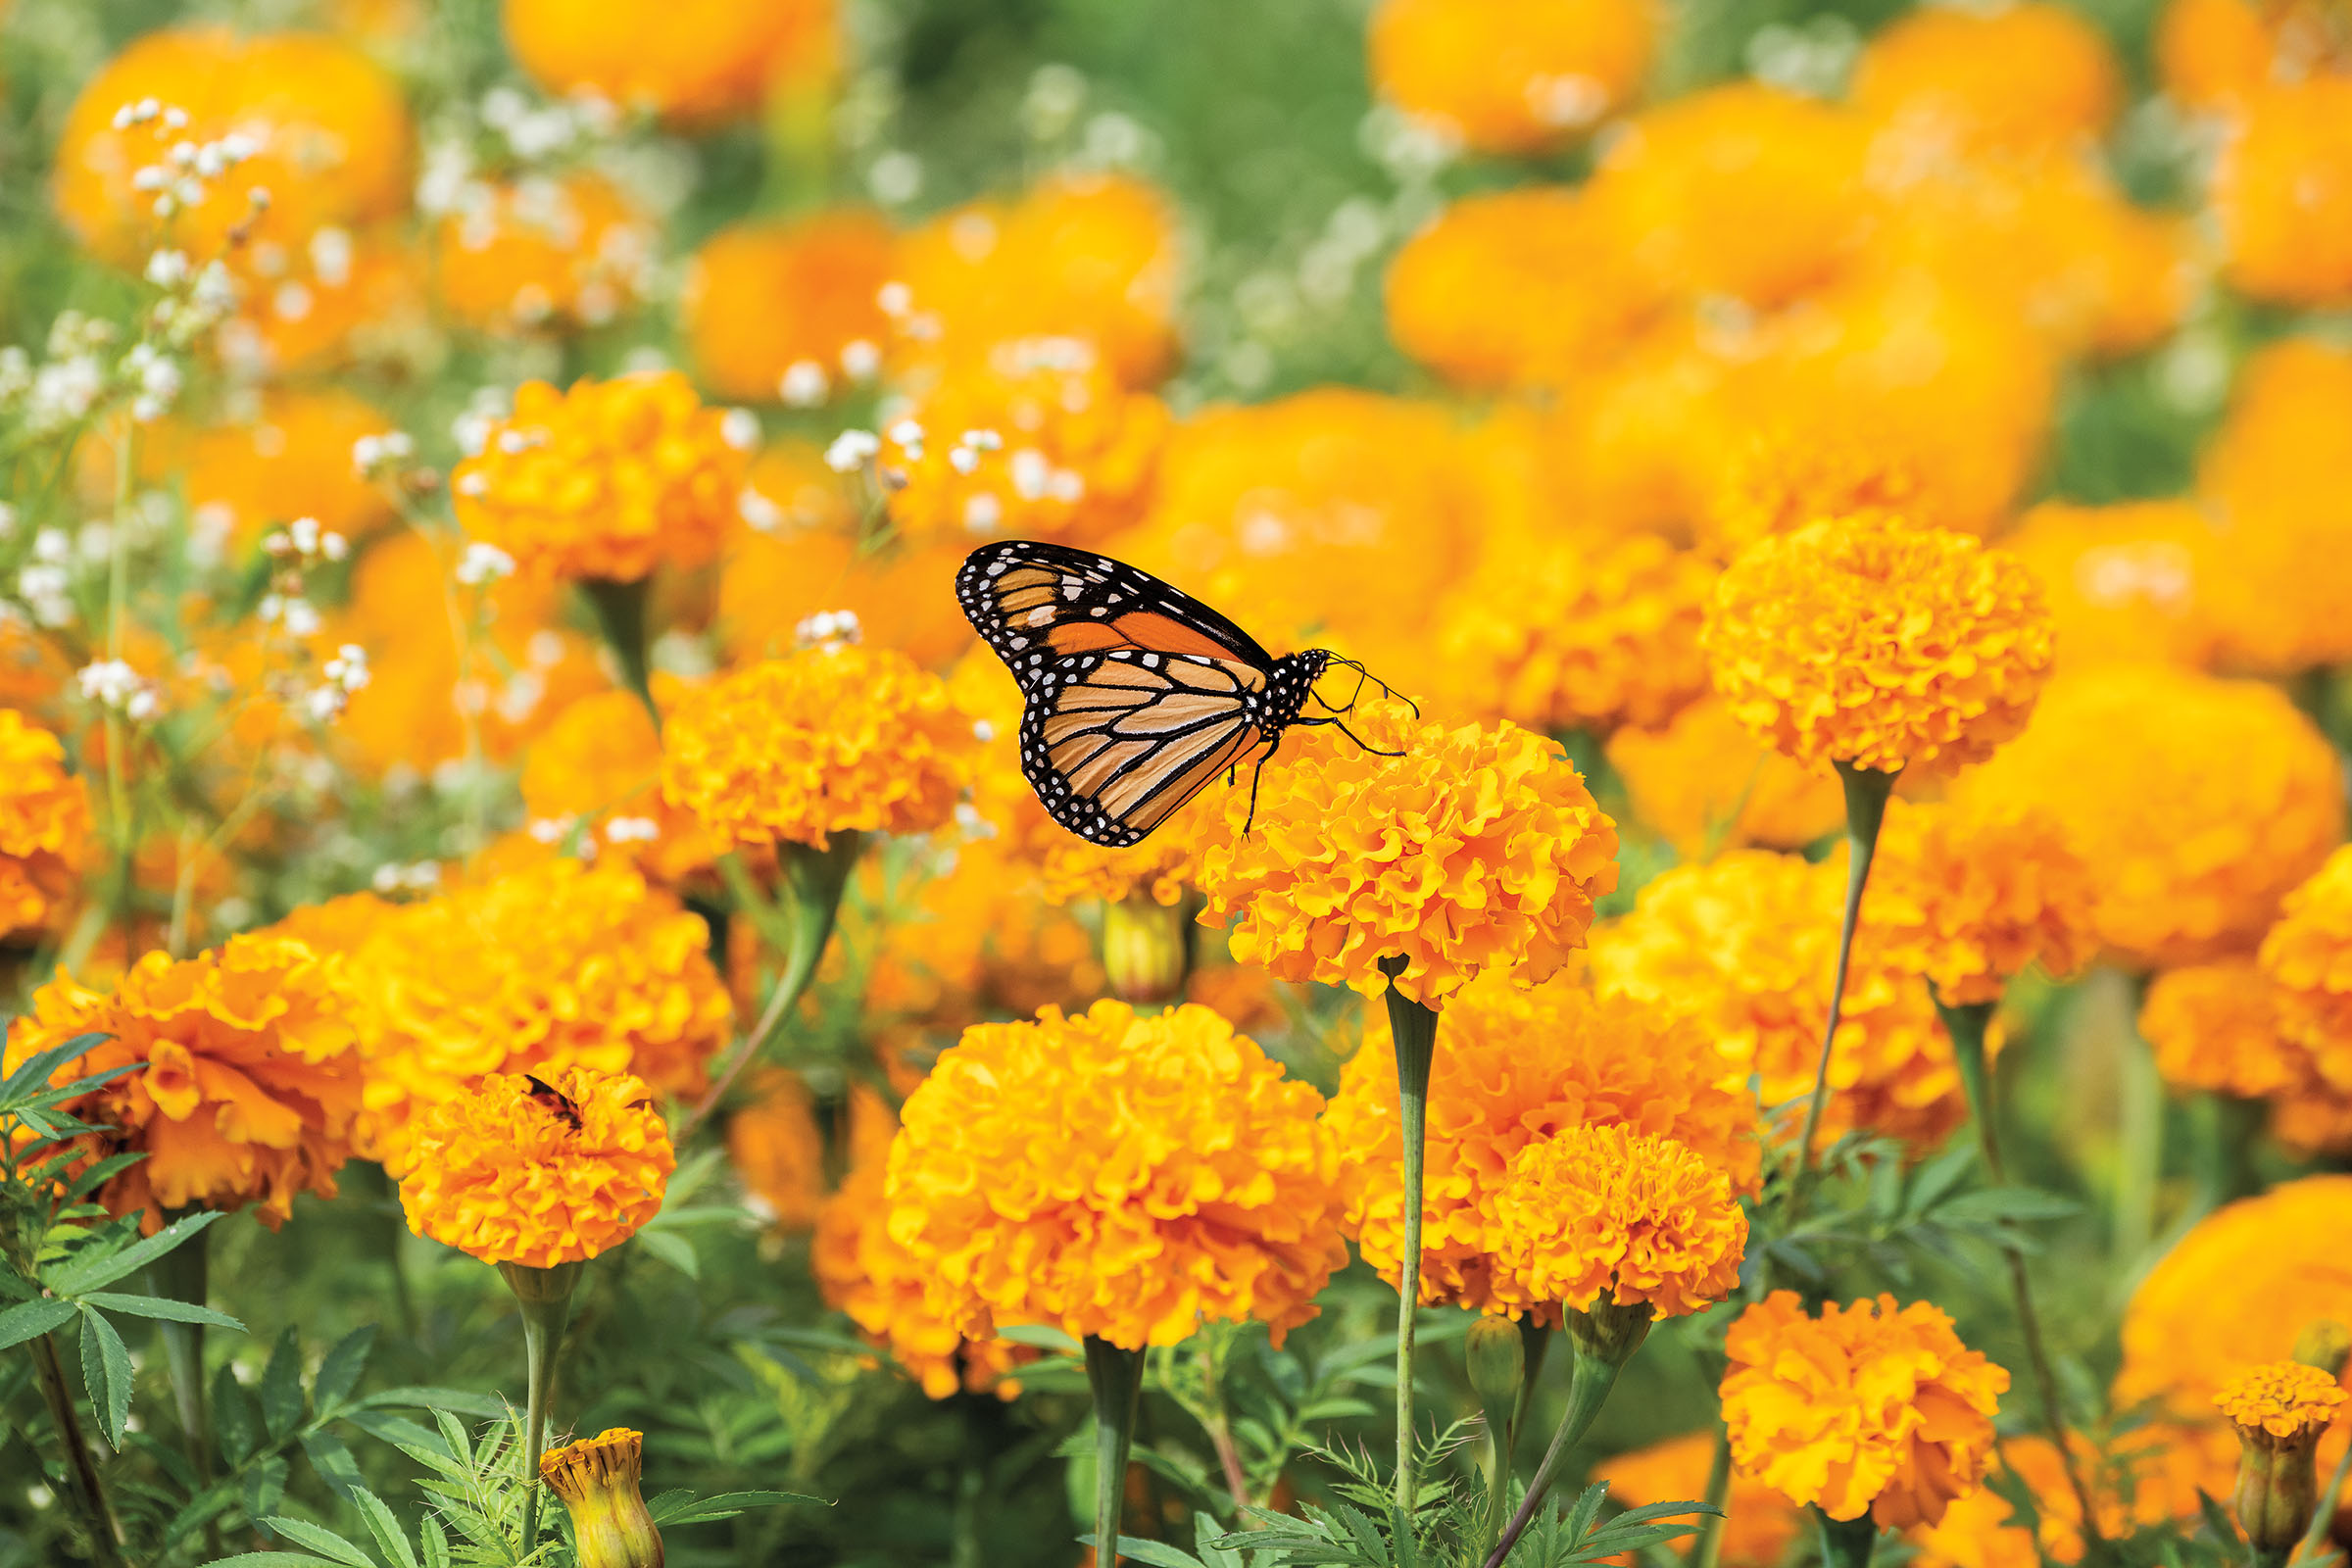 A Monarch butterfly lands on the bright orange top of a marigold flower